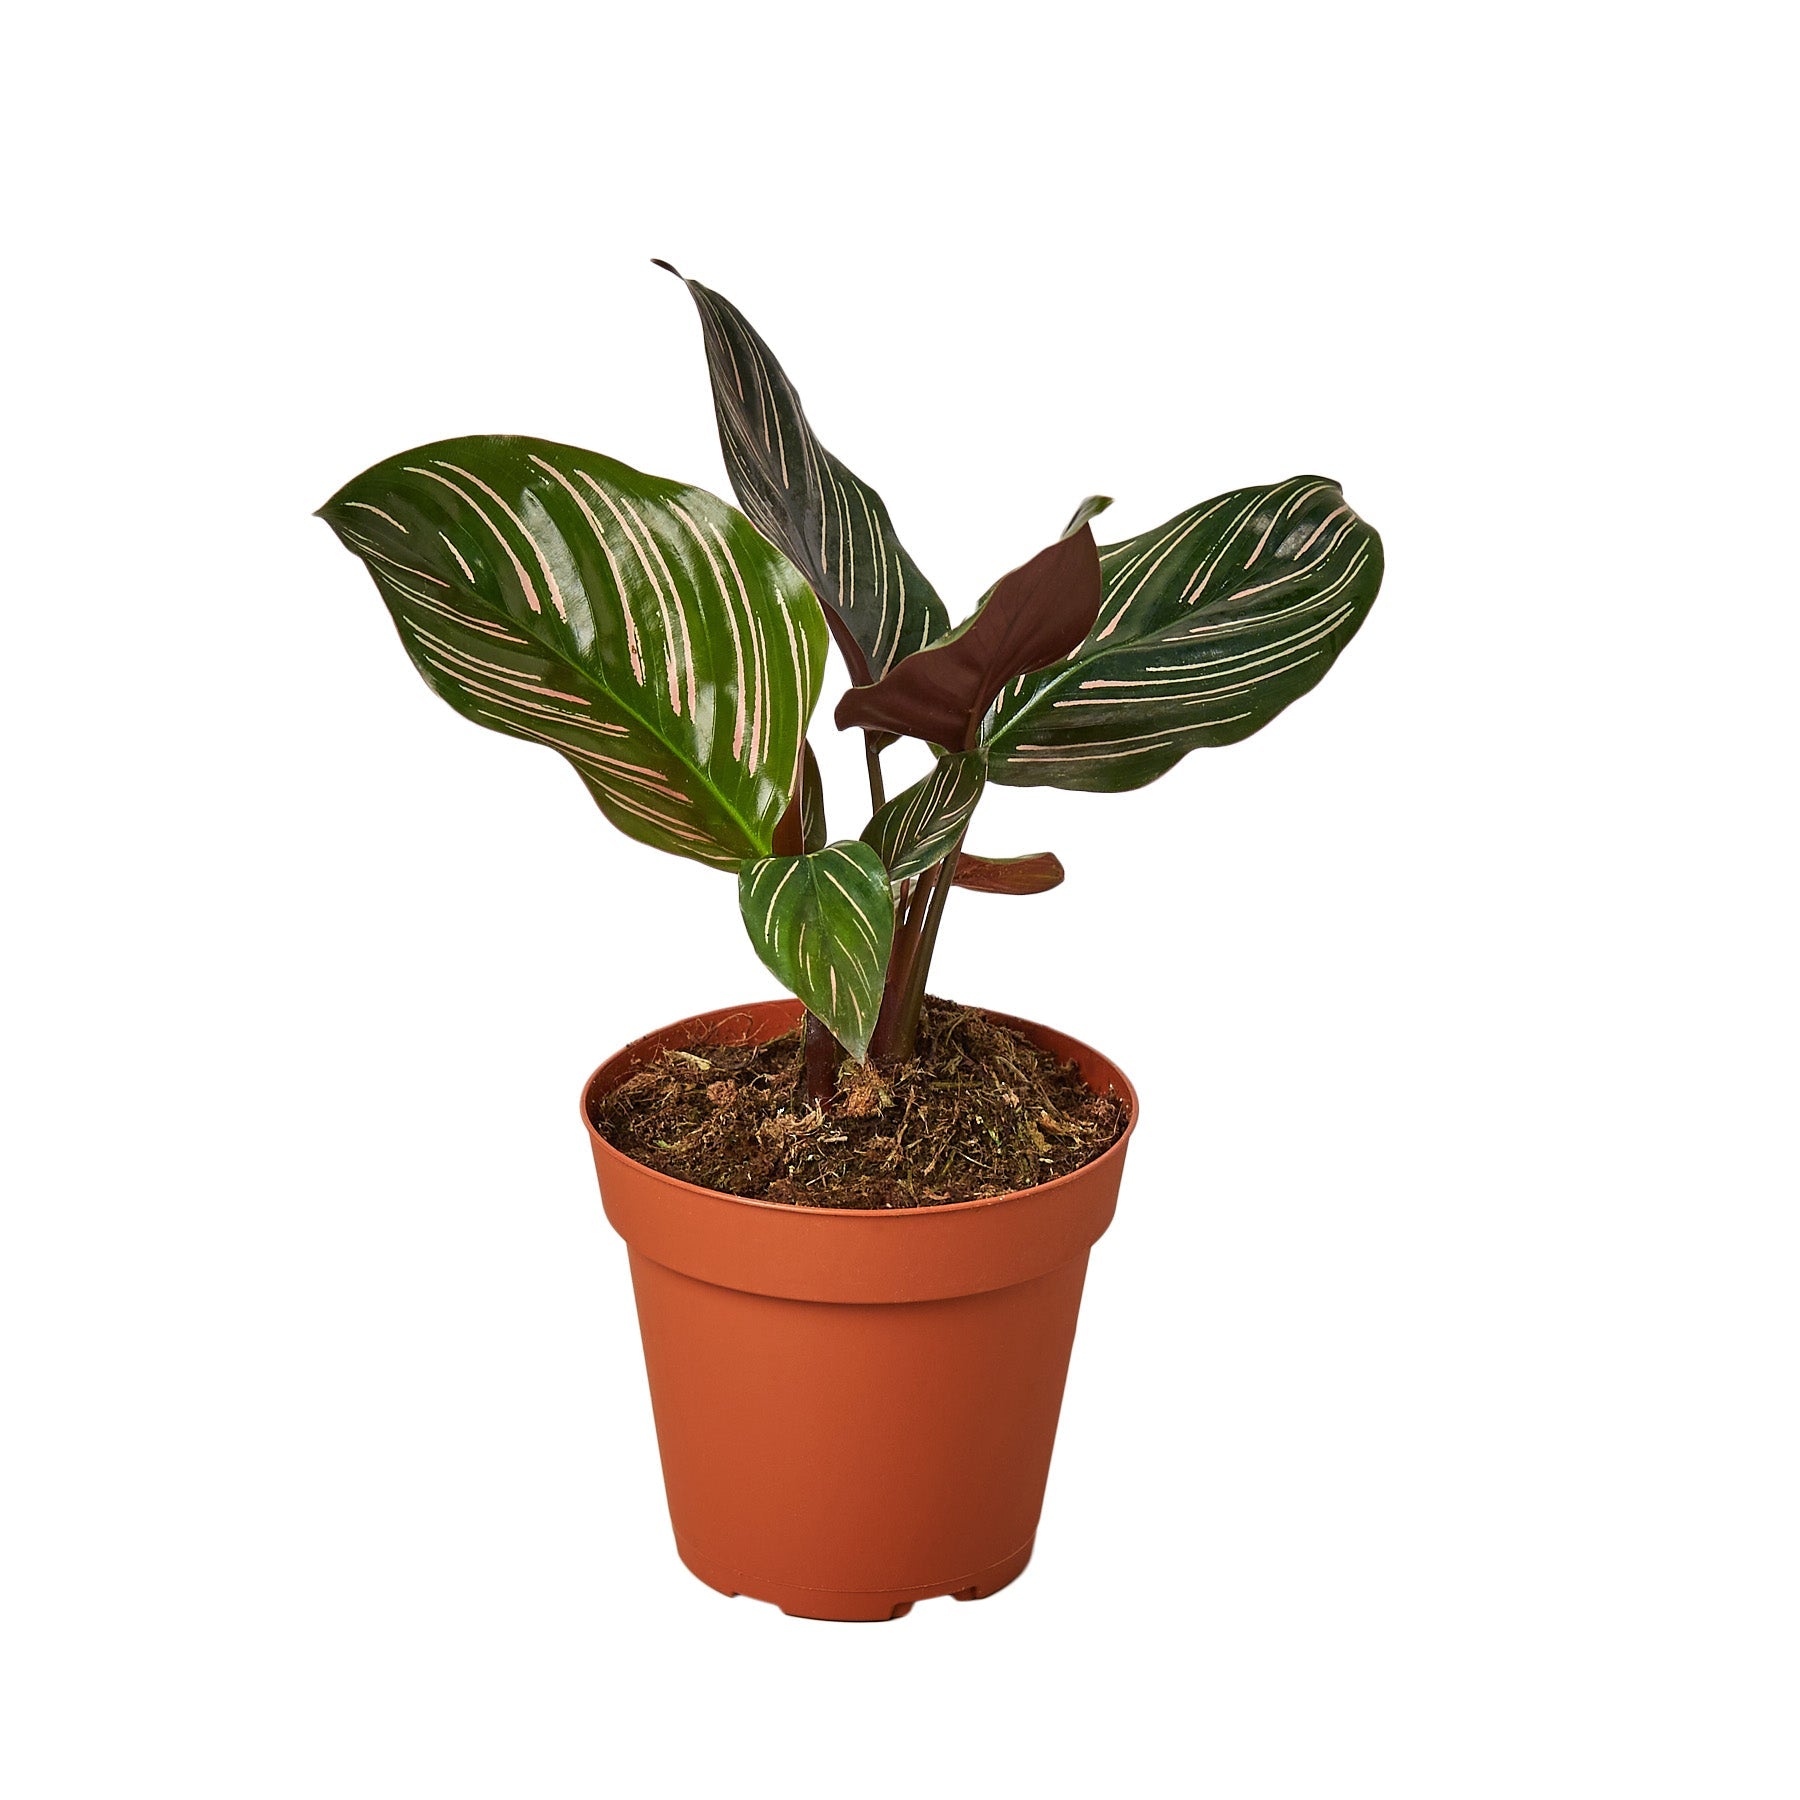 A small plant in a brown pot on a white background, available at top plant nurseries near me.